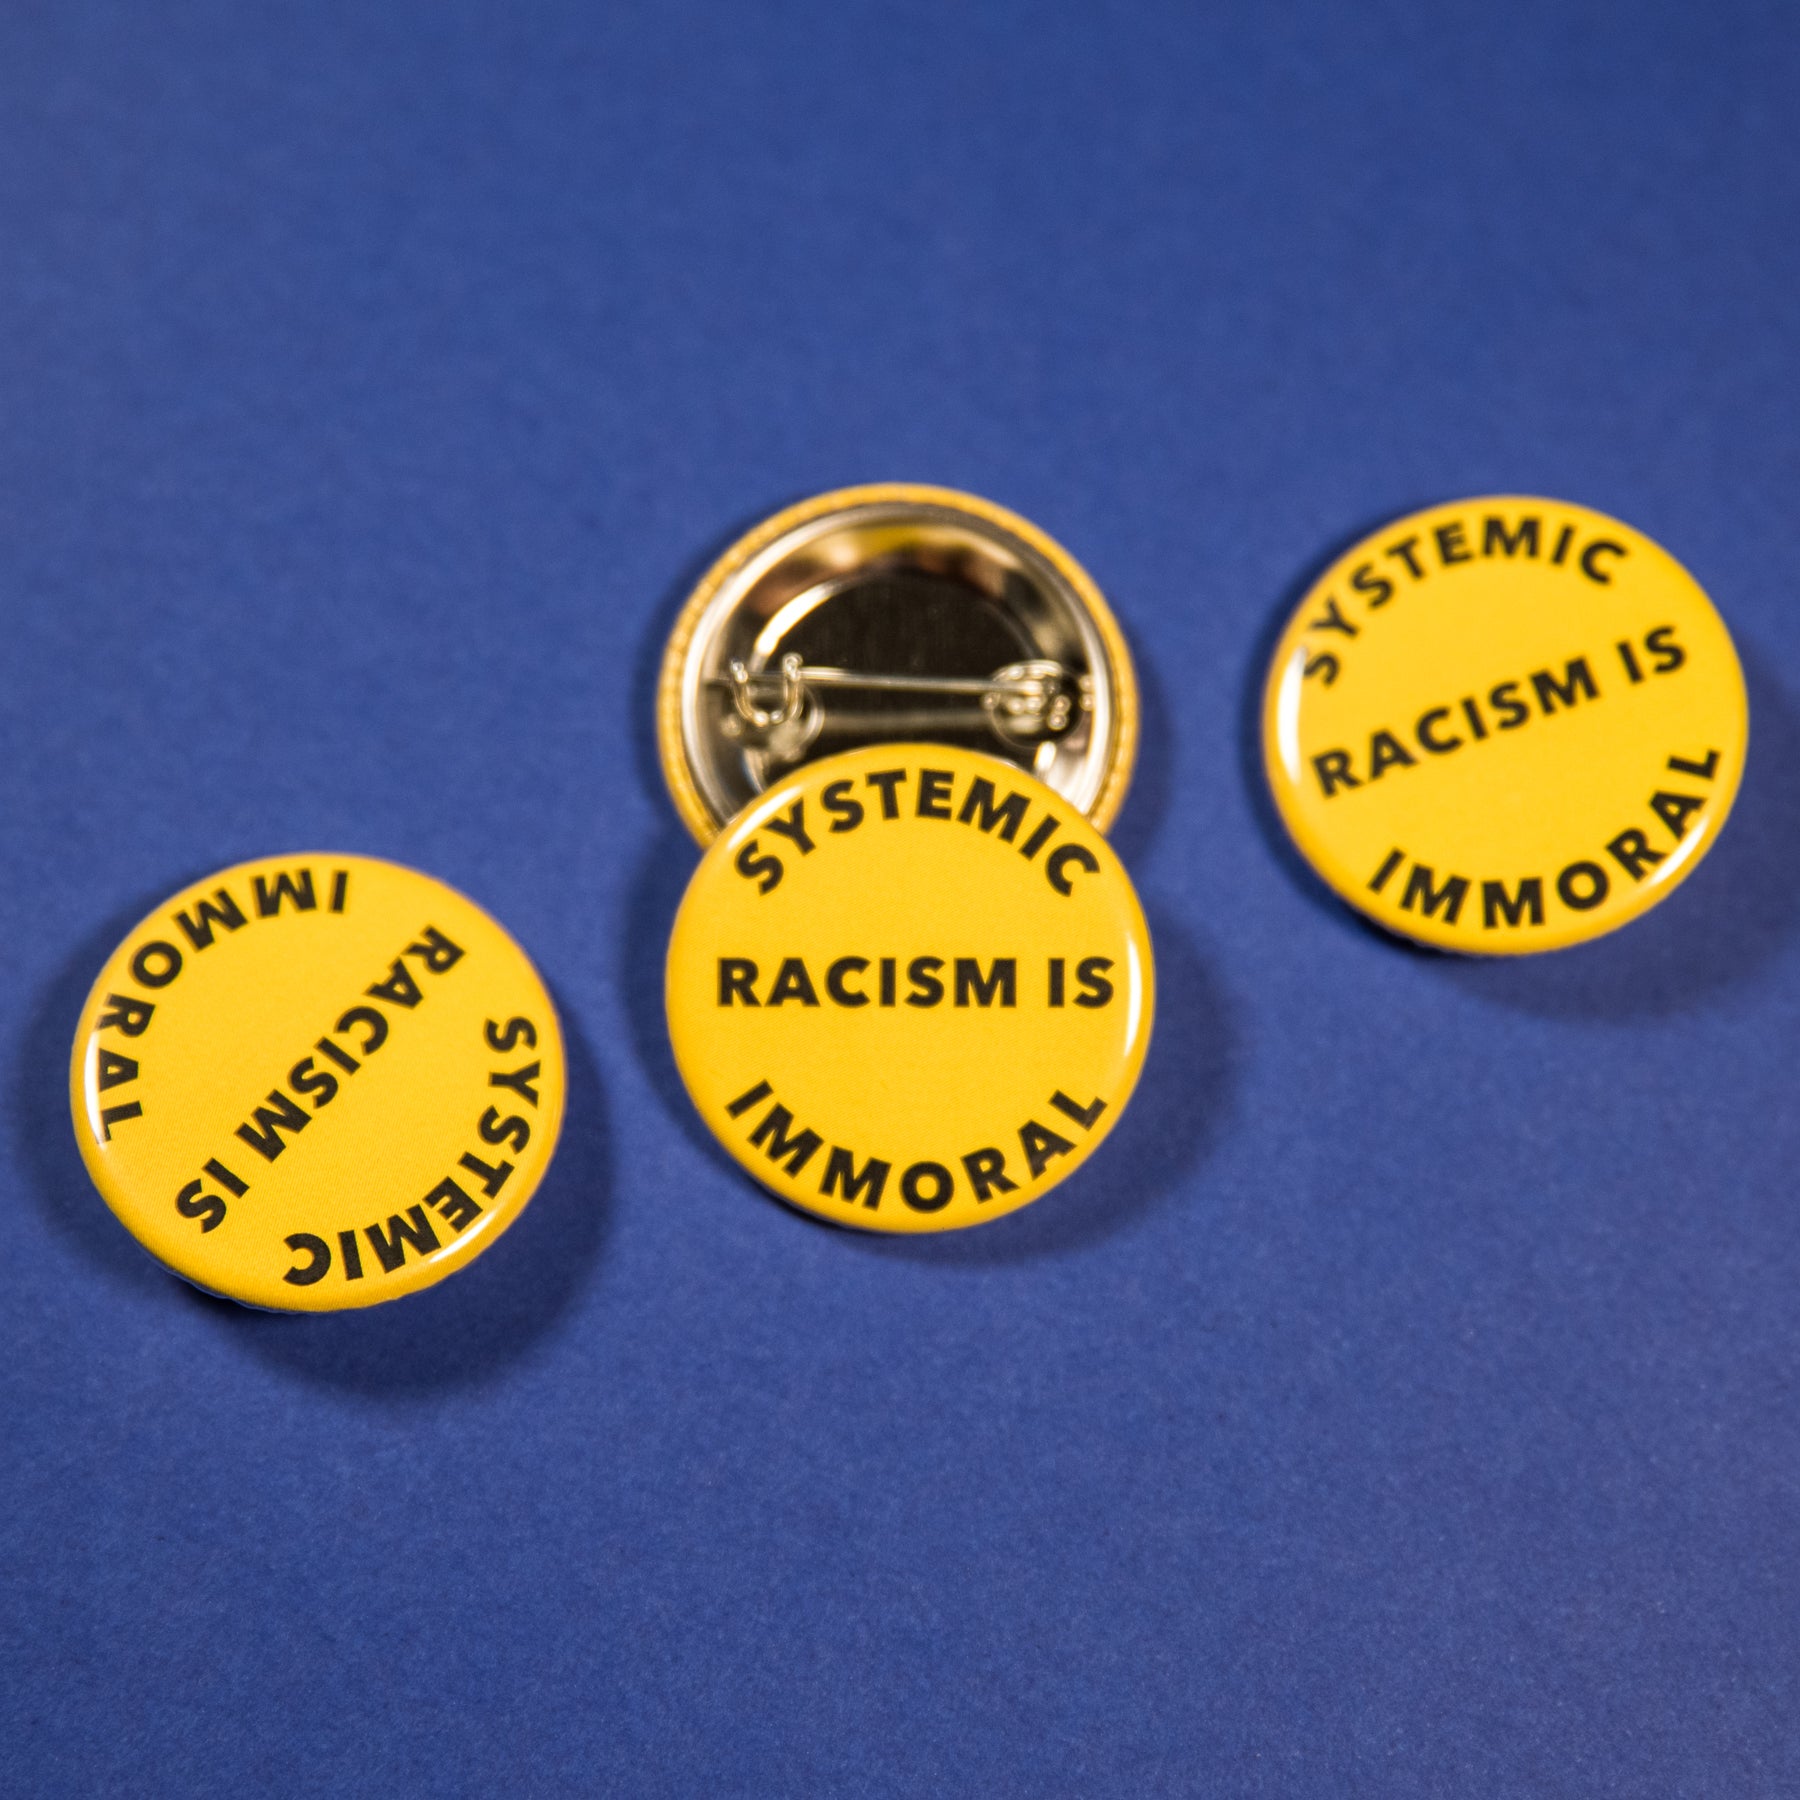 Systemic Racism Is Immoral Button